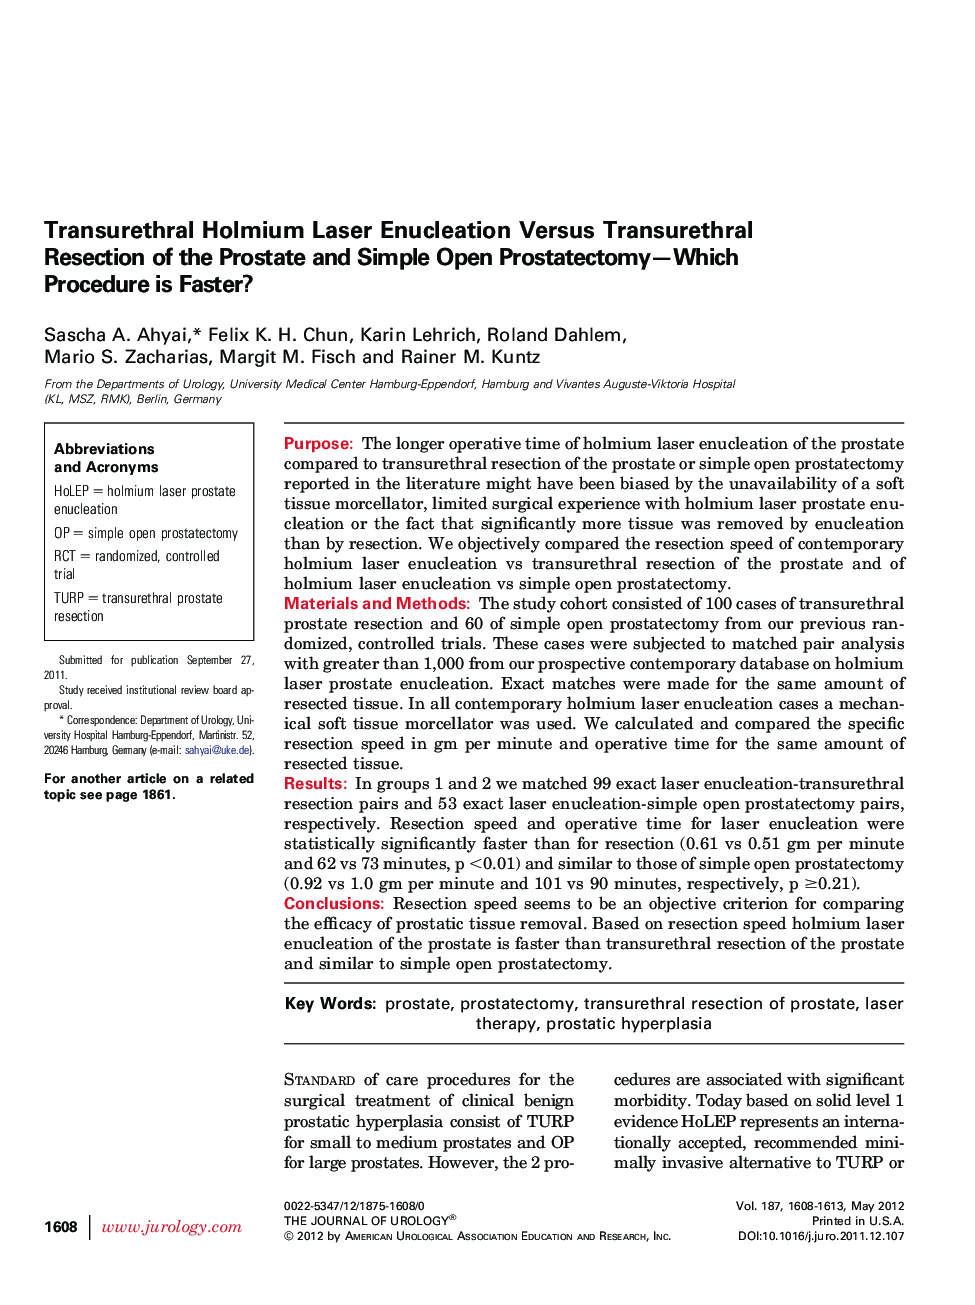 Transurethral Holmium Laser Enucleation Versus Transurethral Resection of the Prostate and Simple Open Prostatectomy—Which Procedure is Faster? 